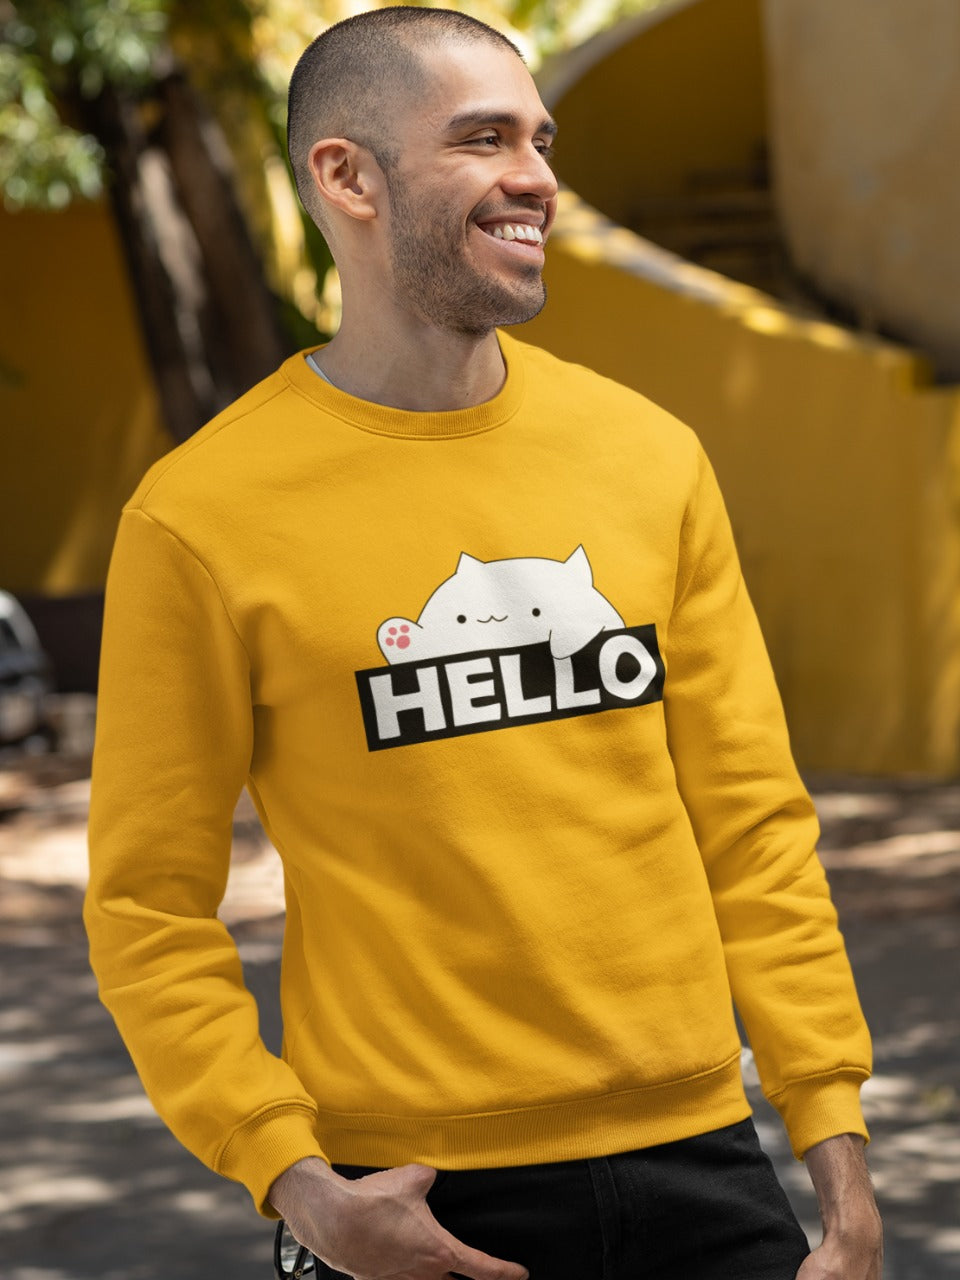 smiling man with trimmed hair and beard wearing a yellow sweatshirt with bongo cat saying hello printed on it, cute funny memes